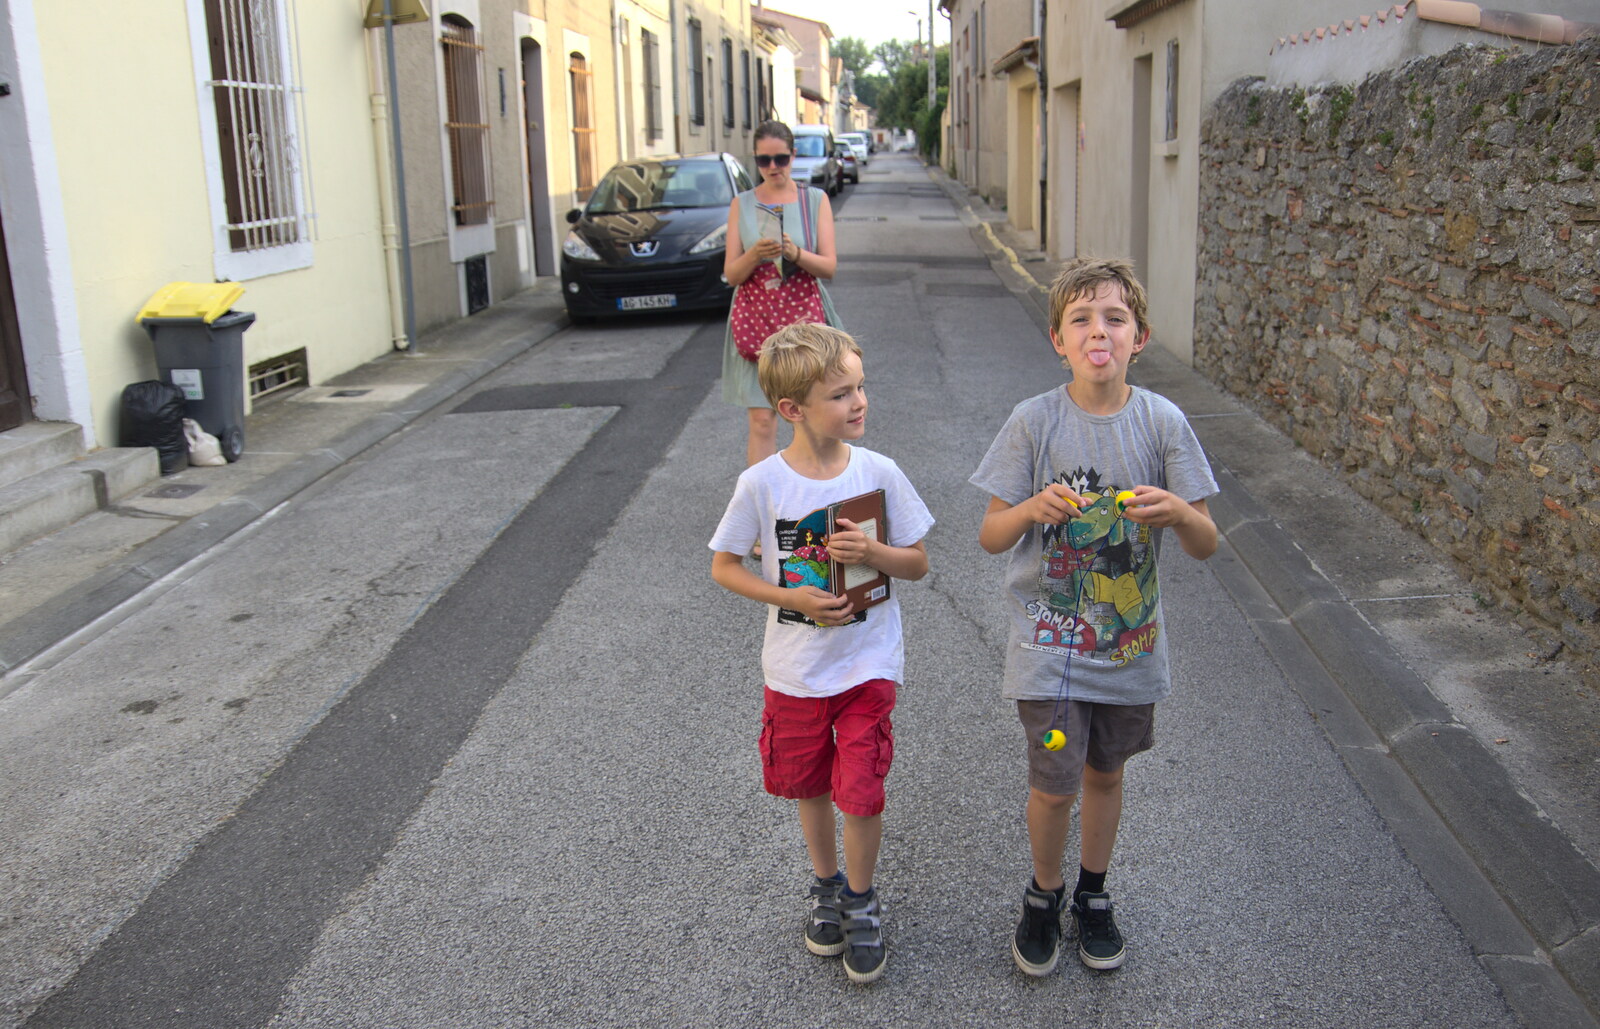 Harry and Fred on the street from A Trip to Carcassonne, Aude, France - 8th August 2018